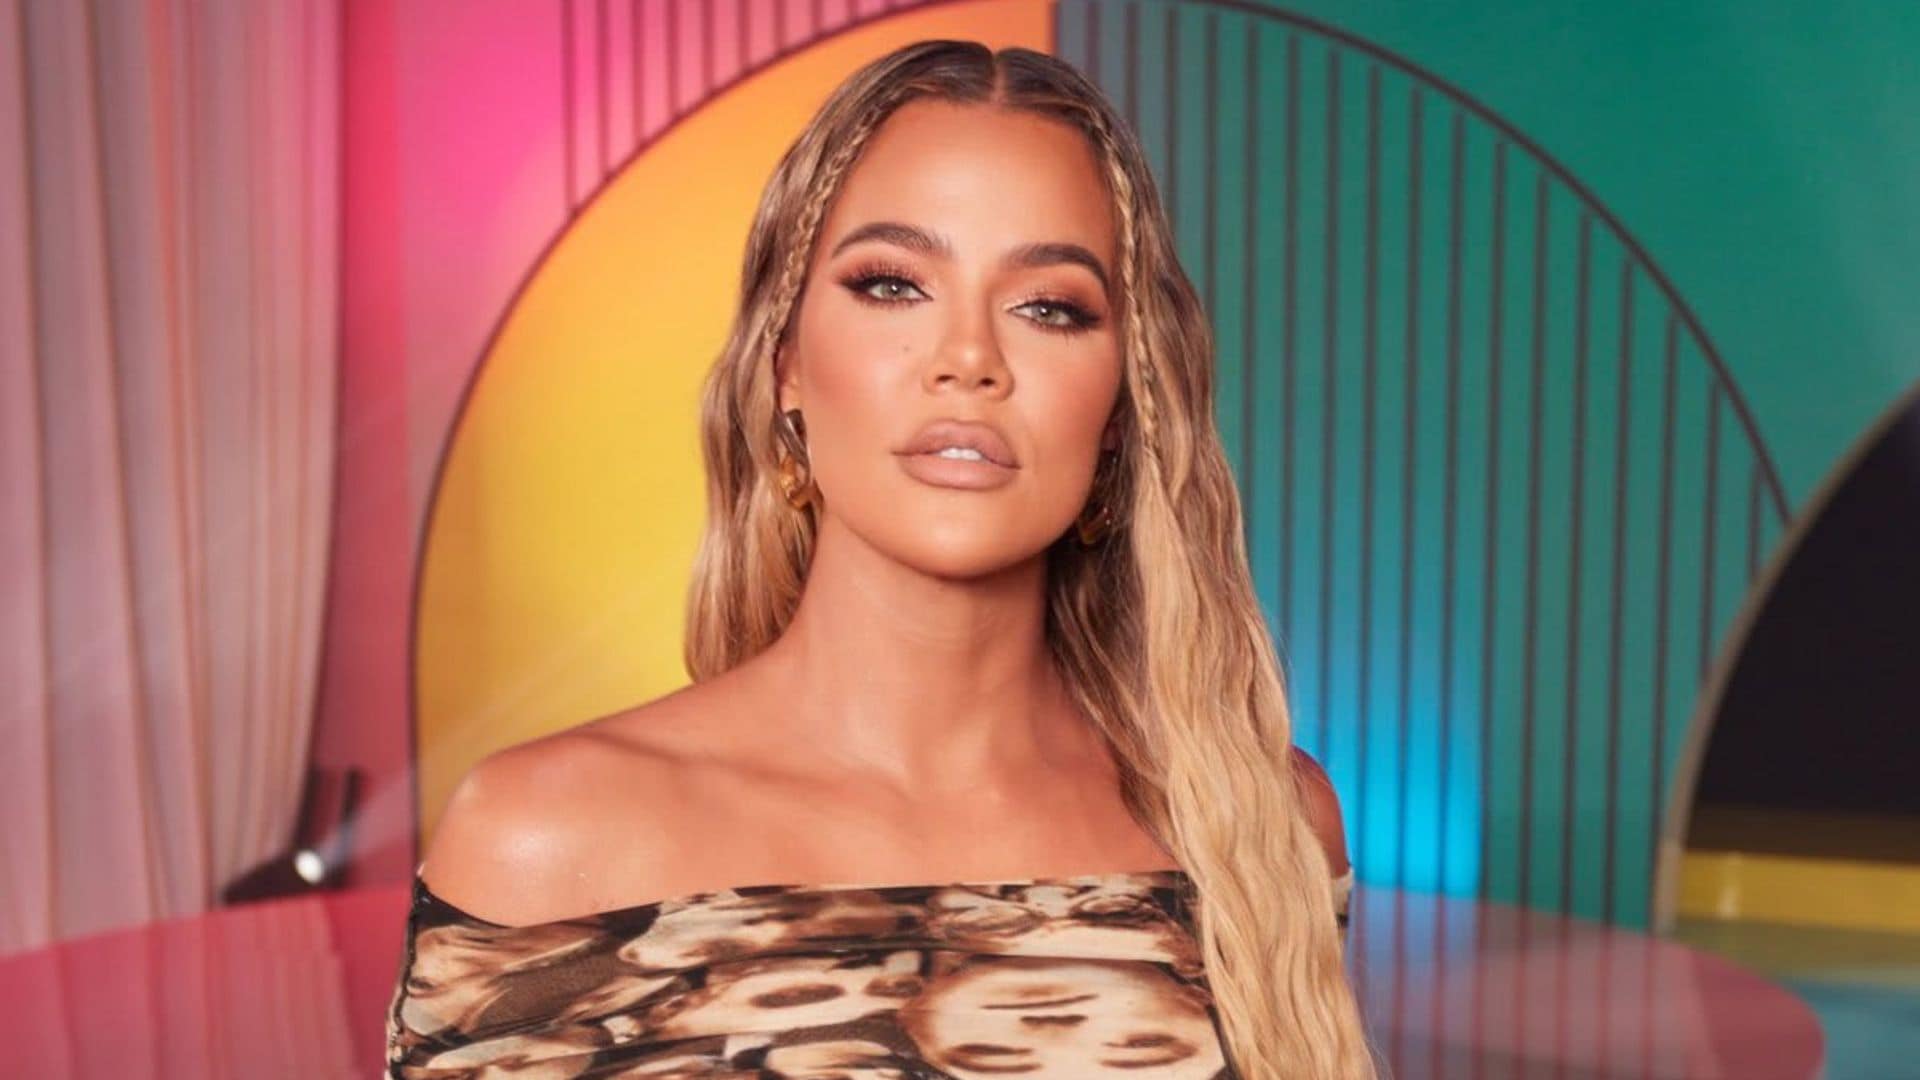 Khloe Kardashian says she is ‘scared’ of social media and limits her screen time